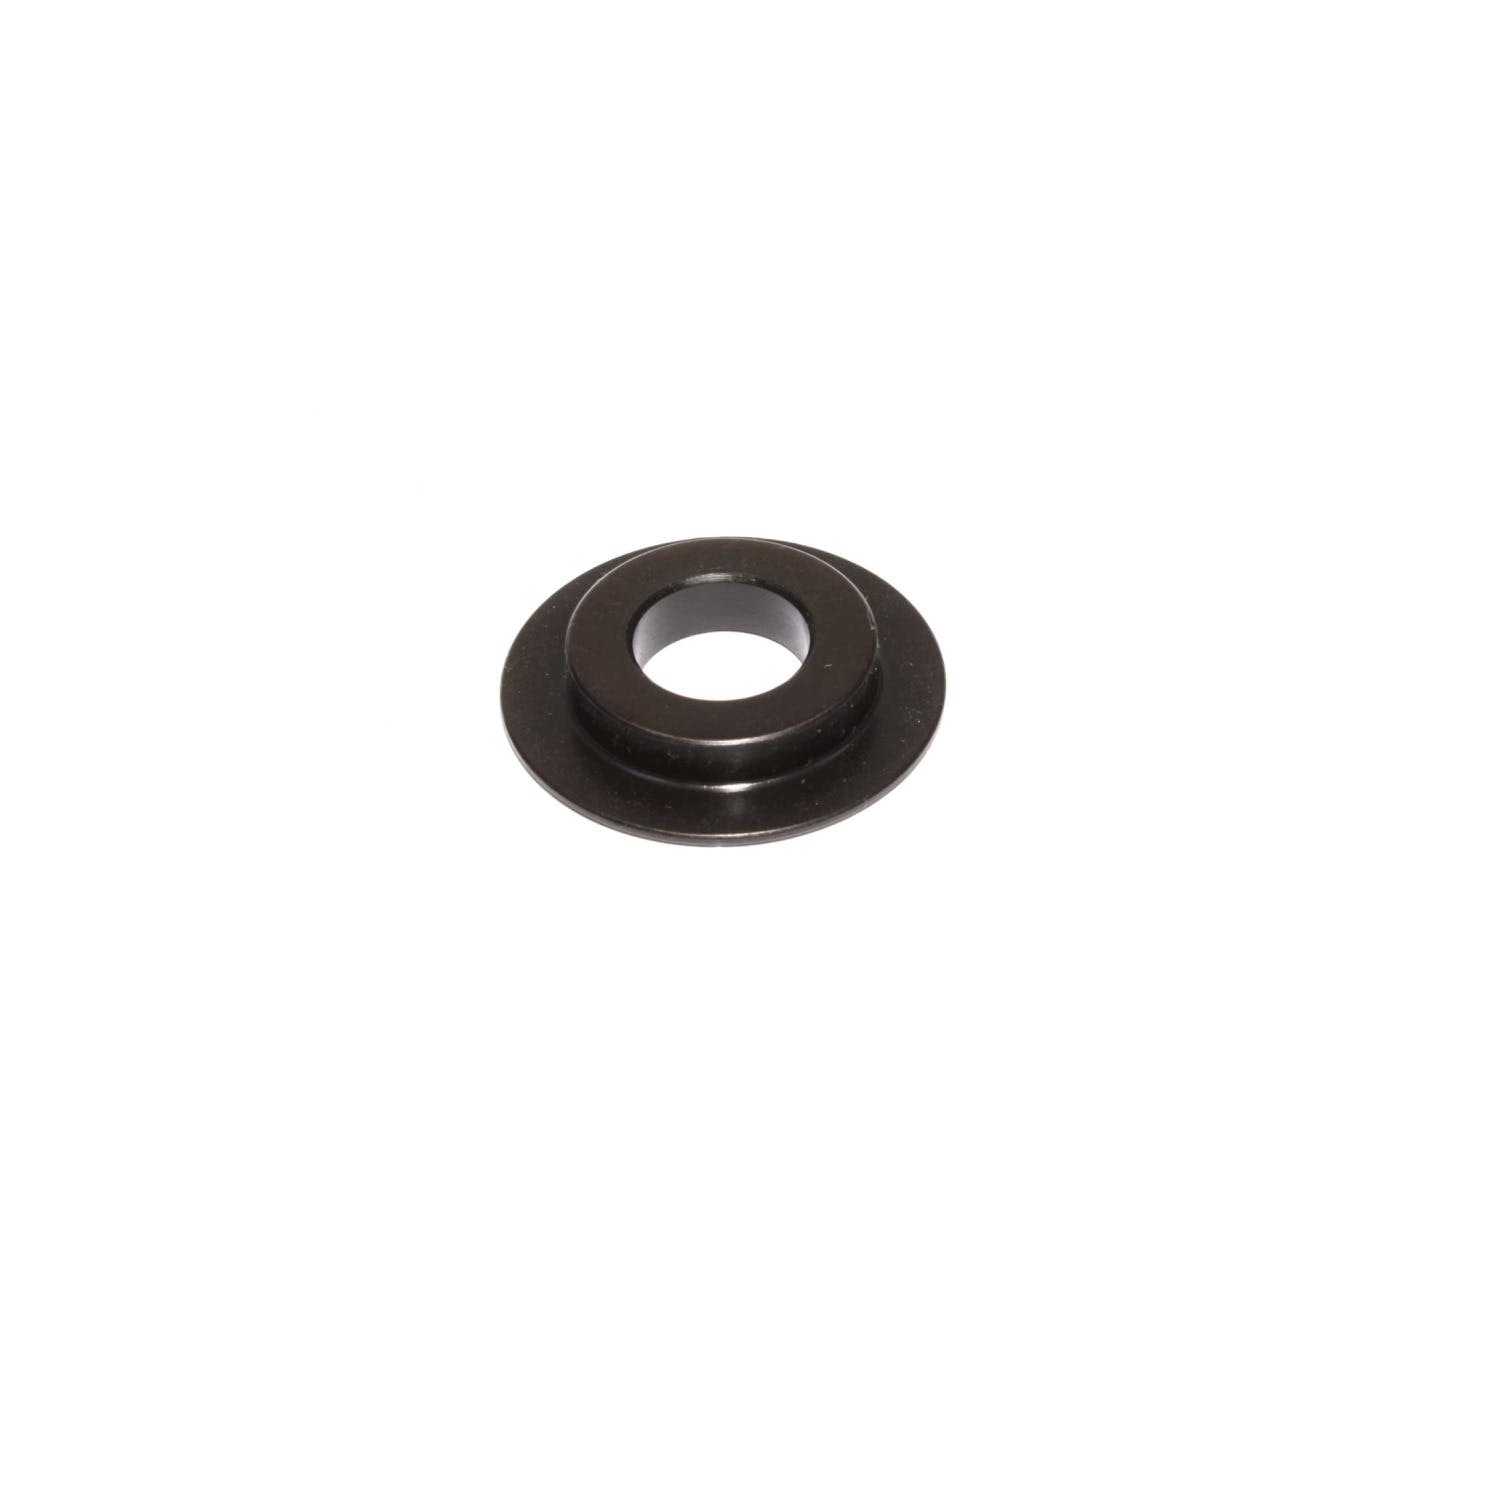 Competition Cams 4670-1 ID Spring Locator - 1.420 inch OD, .570 inch ID, .060 inch Thickness